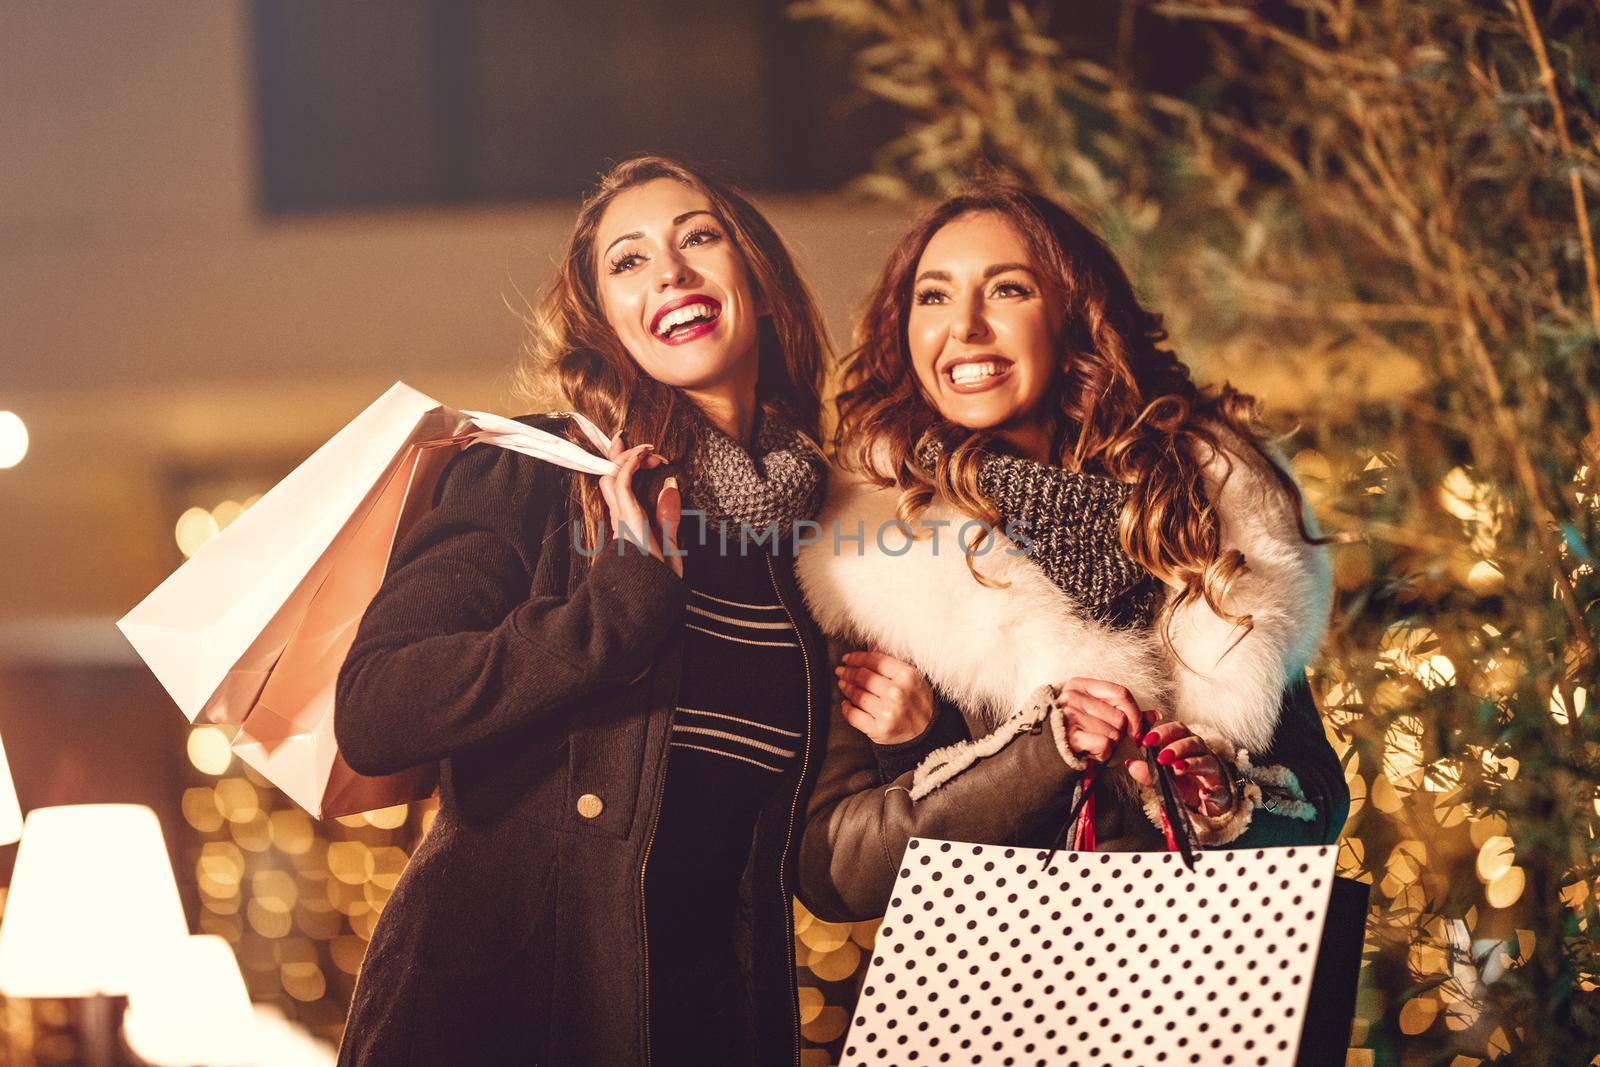 Two female friends enjoy the night in shopping and laughing with shopping bags in their hands.